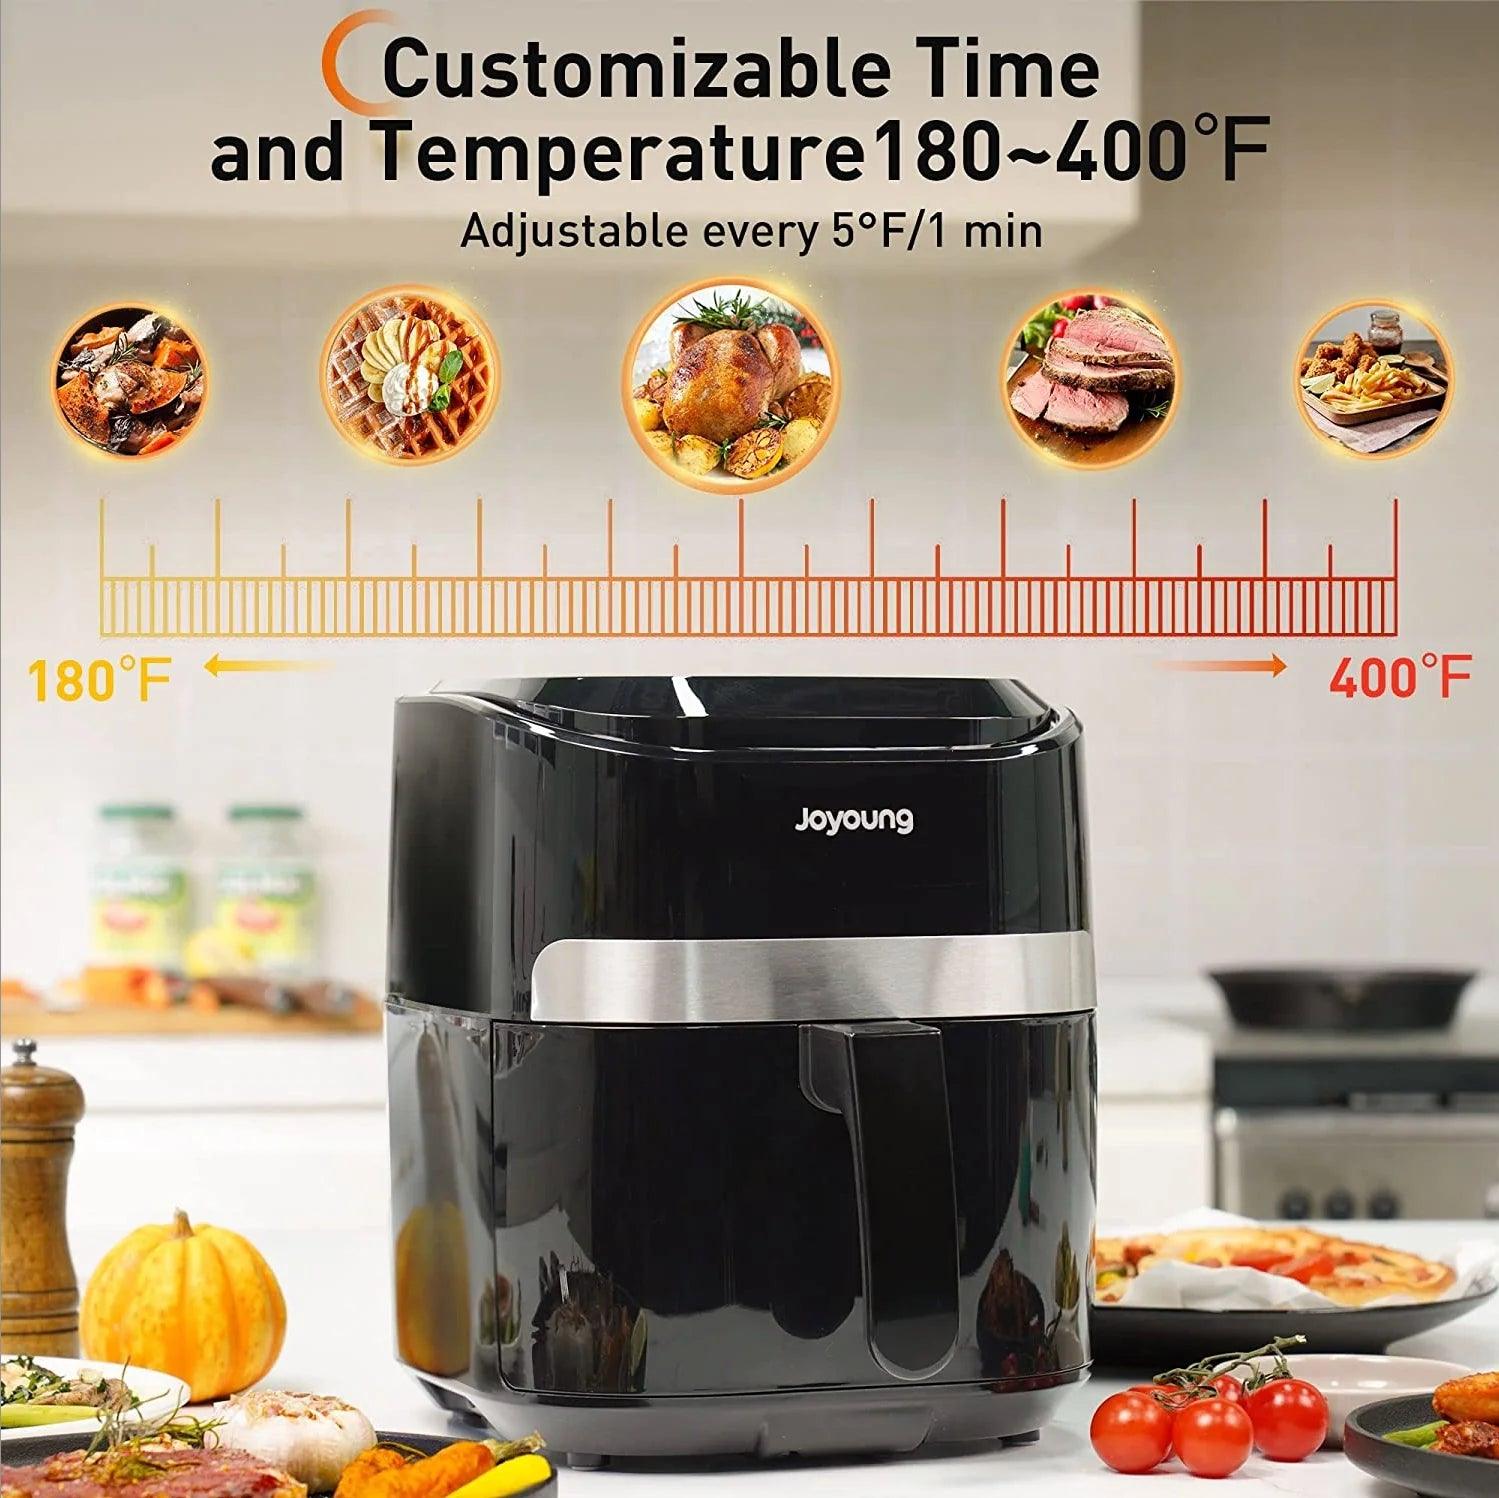 JOYOUNG Air Fryer K45-VF-571,4.8Qt AirFryer, 93% less fat, Hot Oven Cooker with ℃ to ℉ Switch, Nonstick Basket, Black